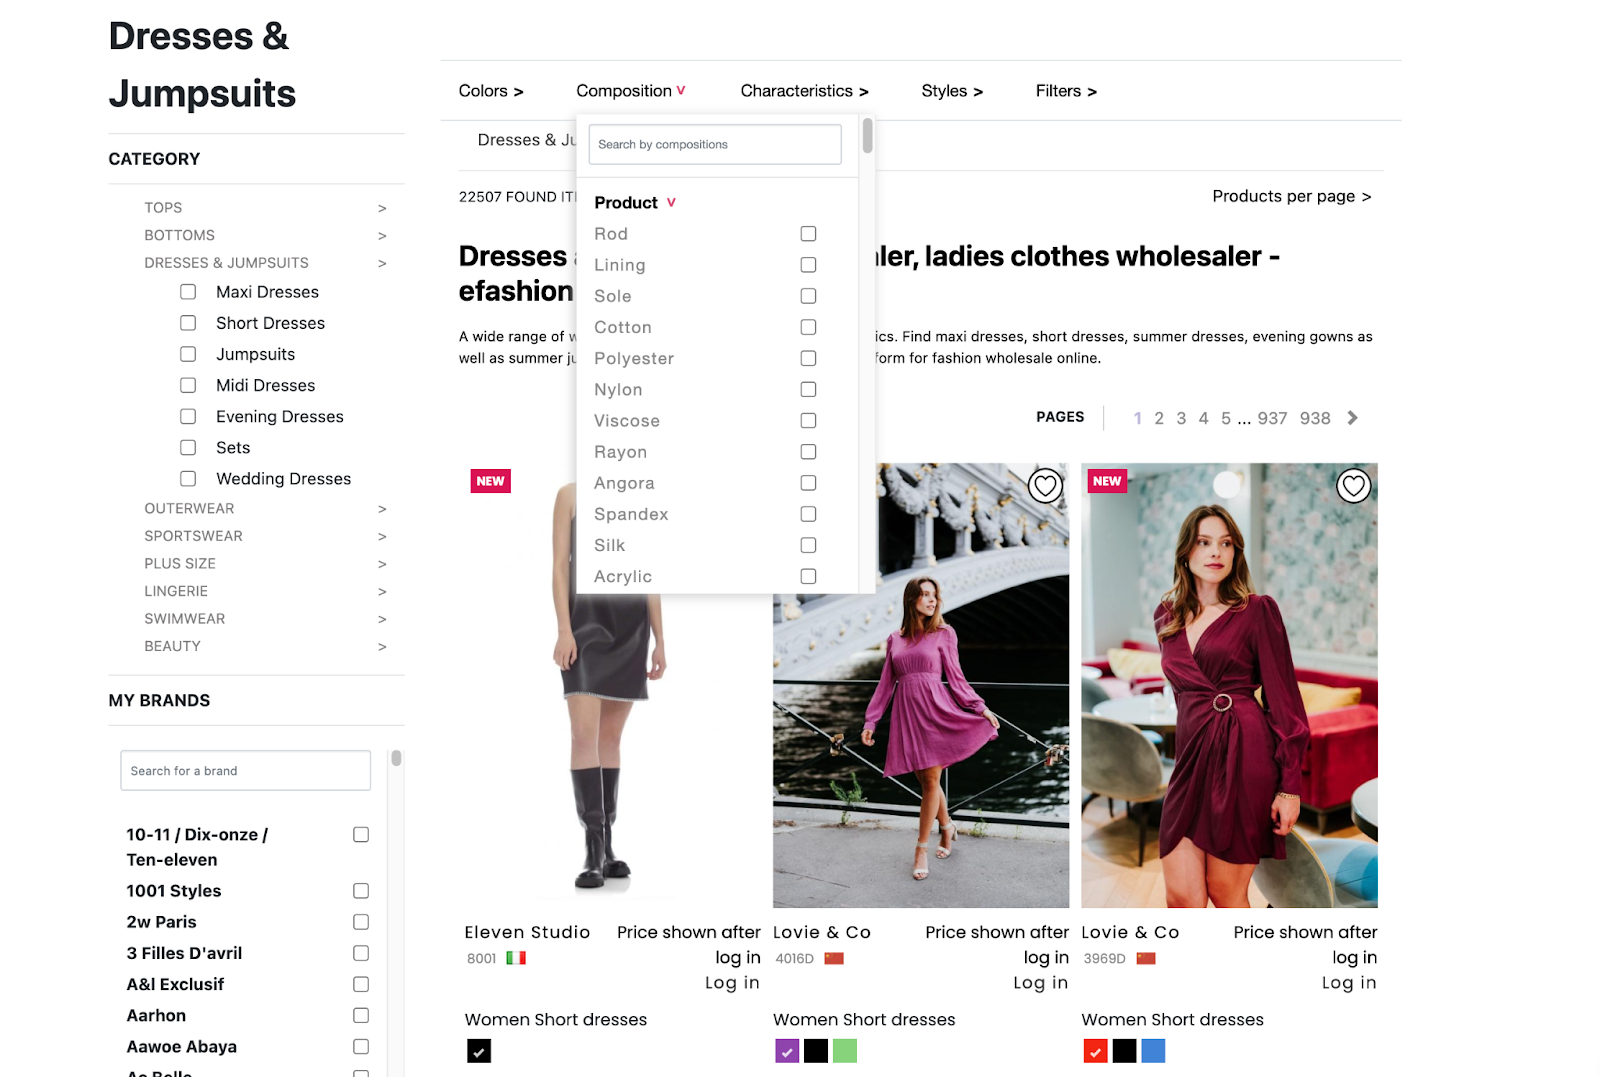 Category page on eFashion Paris showing options for filtering based on product composition